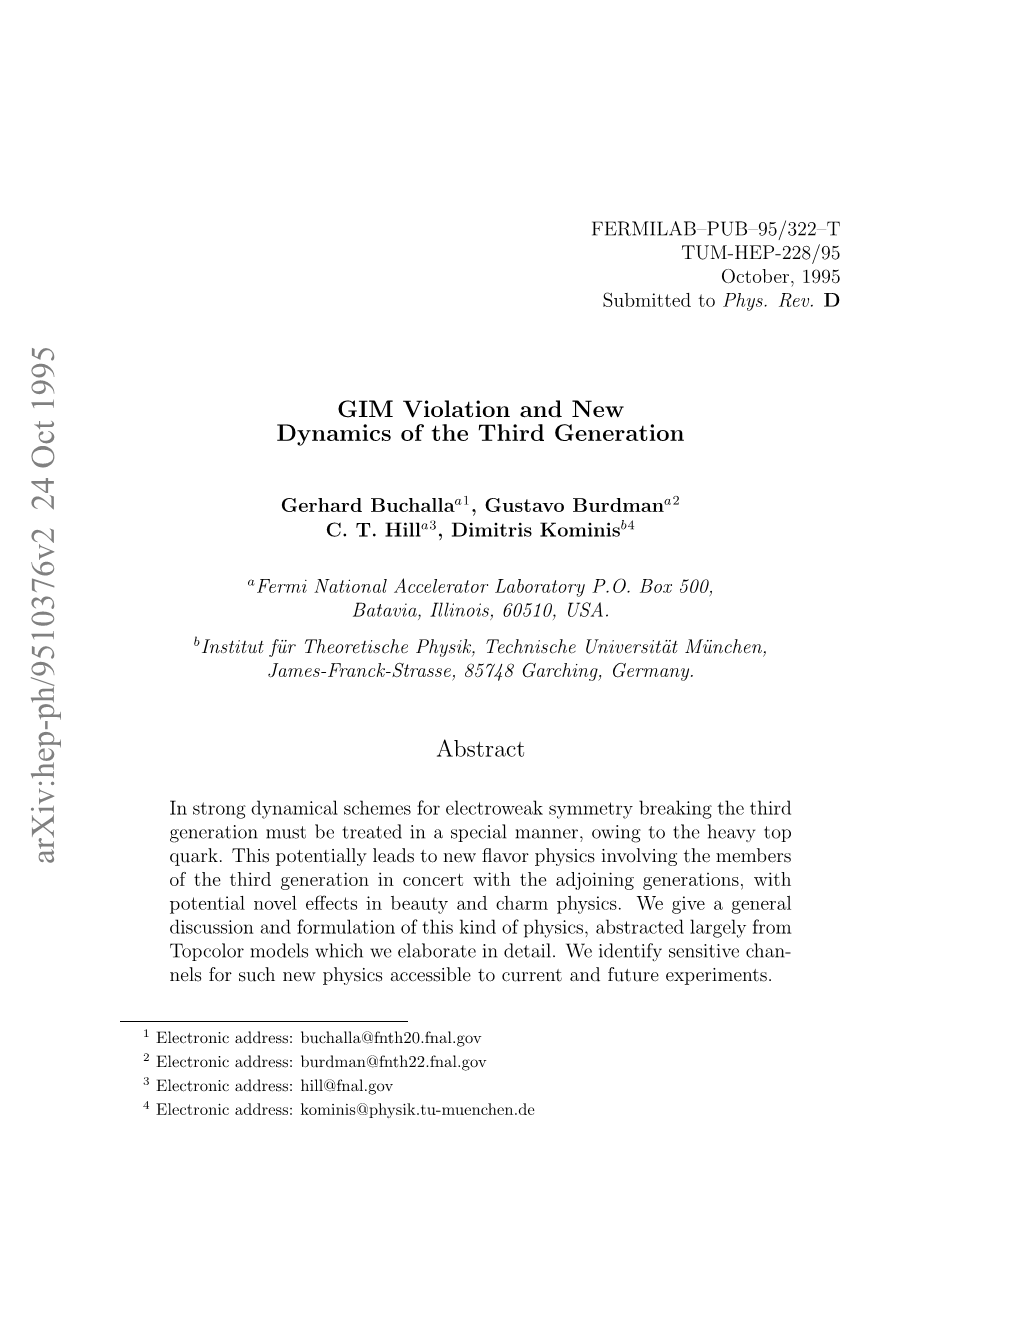 GIM Violation and New Dynamics of the Third Generation